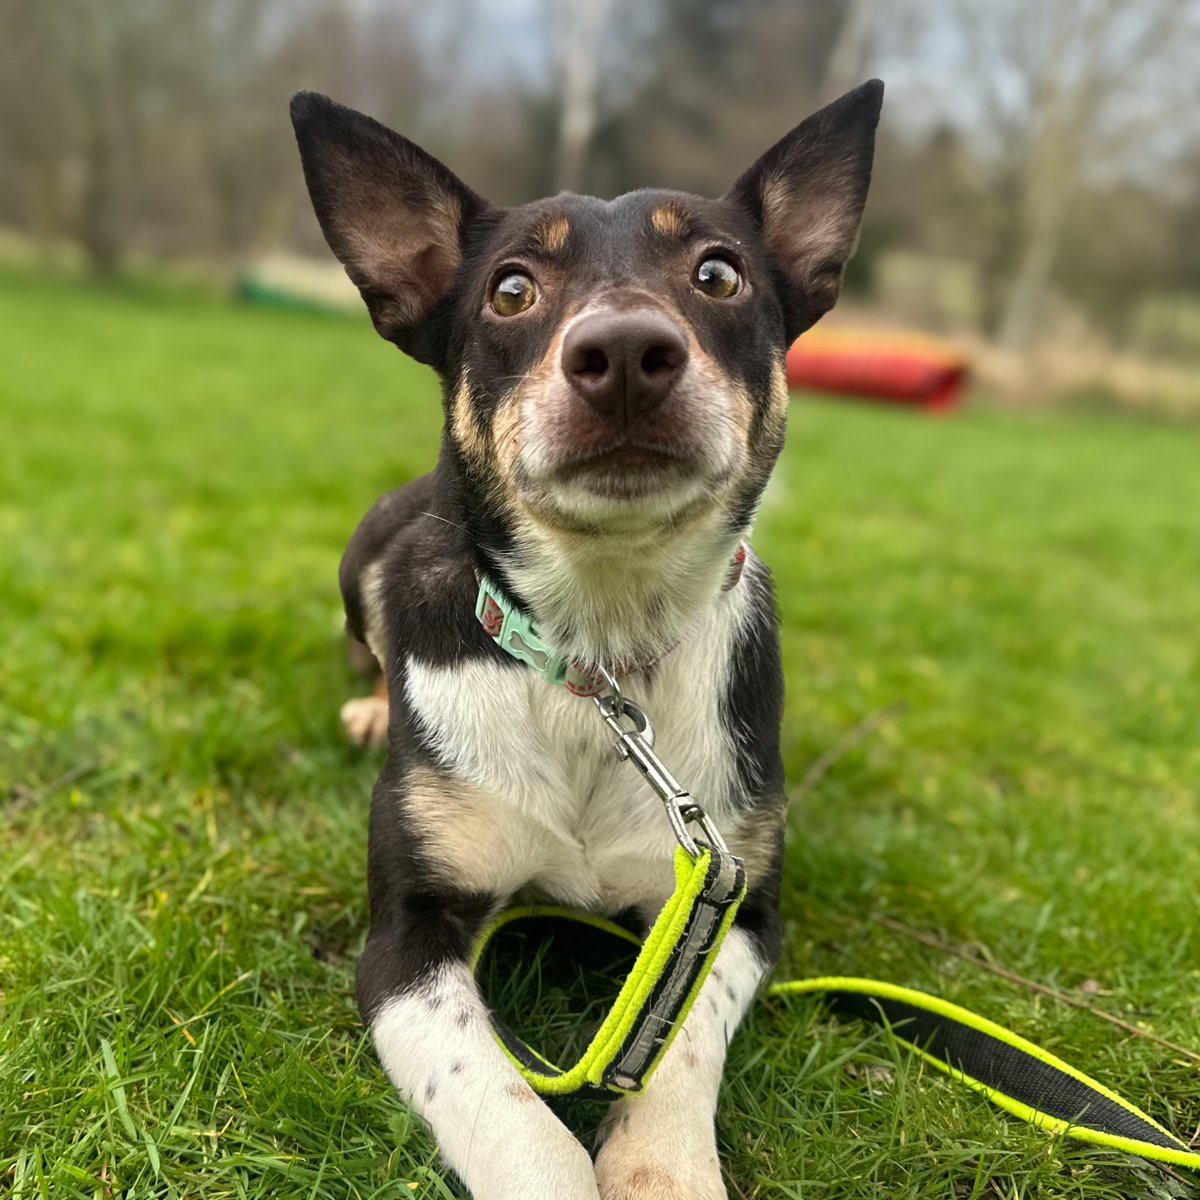 Roxy is all ears, waiting to hear of any interest in adopting her. If you think you could offer her a home please visit bordercollietrustgb.org.uk/rehoming/how-d…